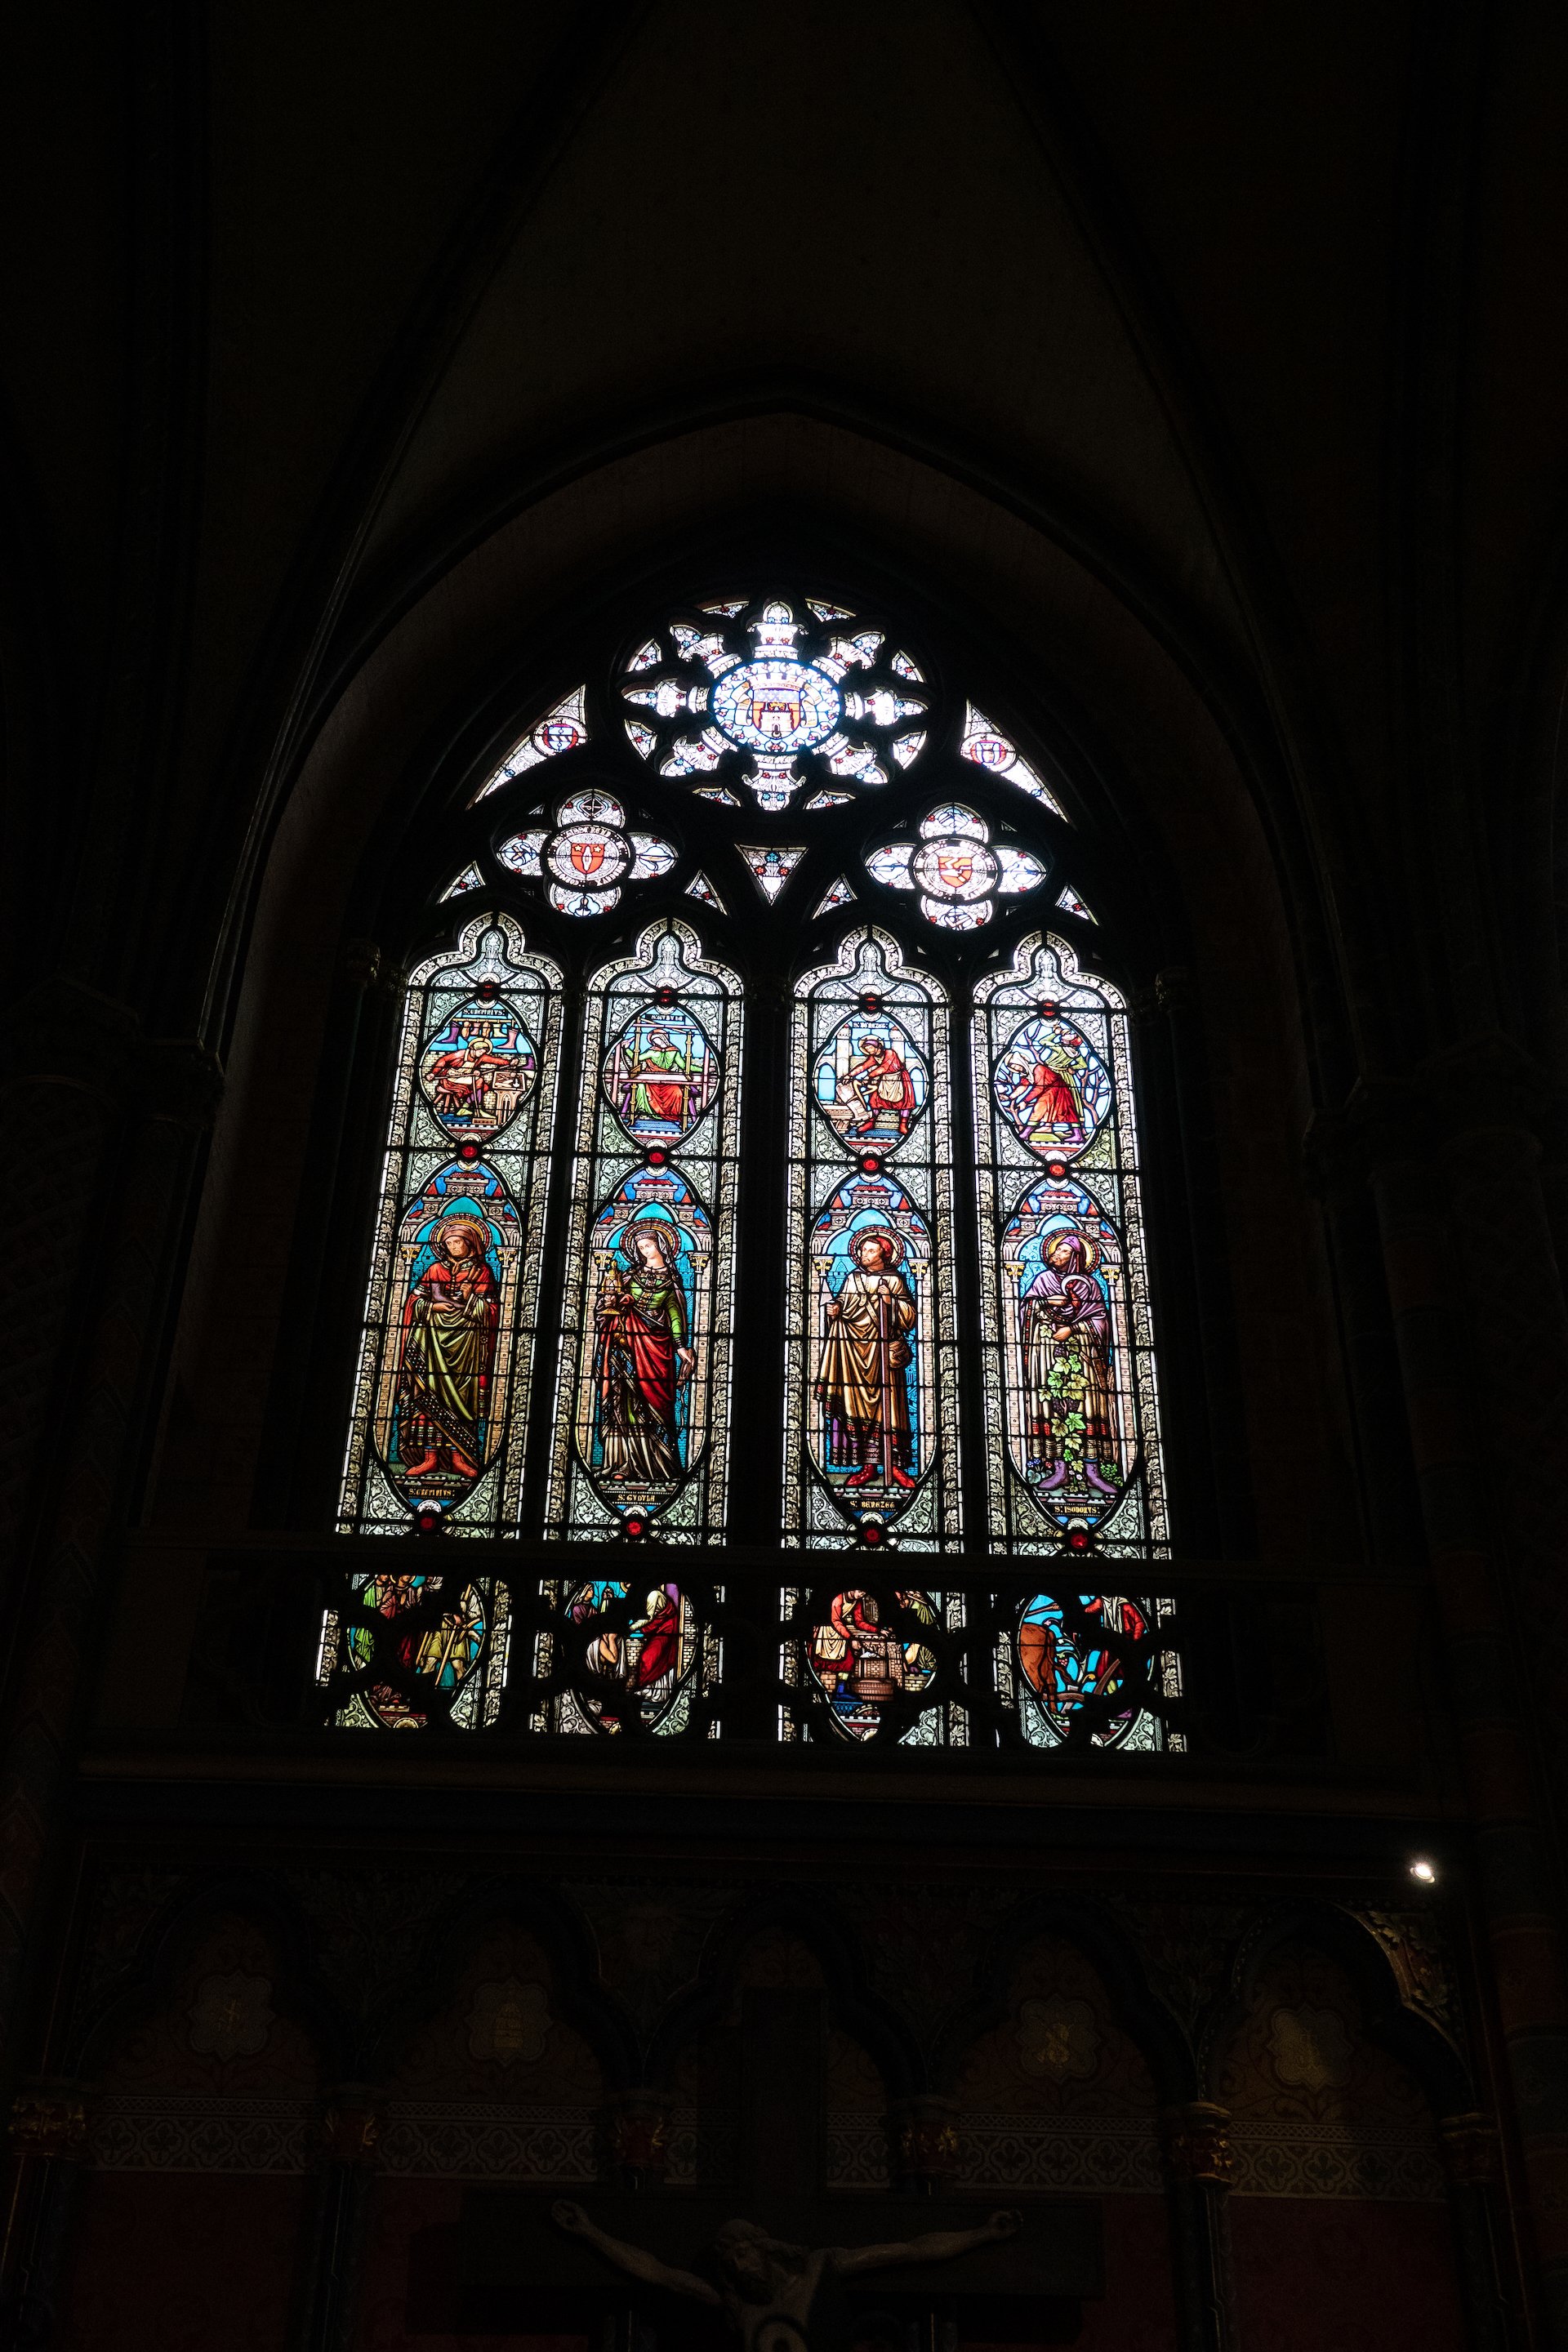  More details of the stained glass.  